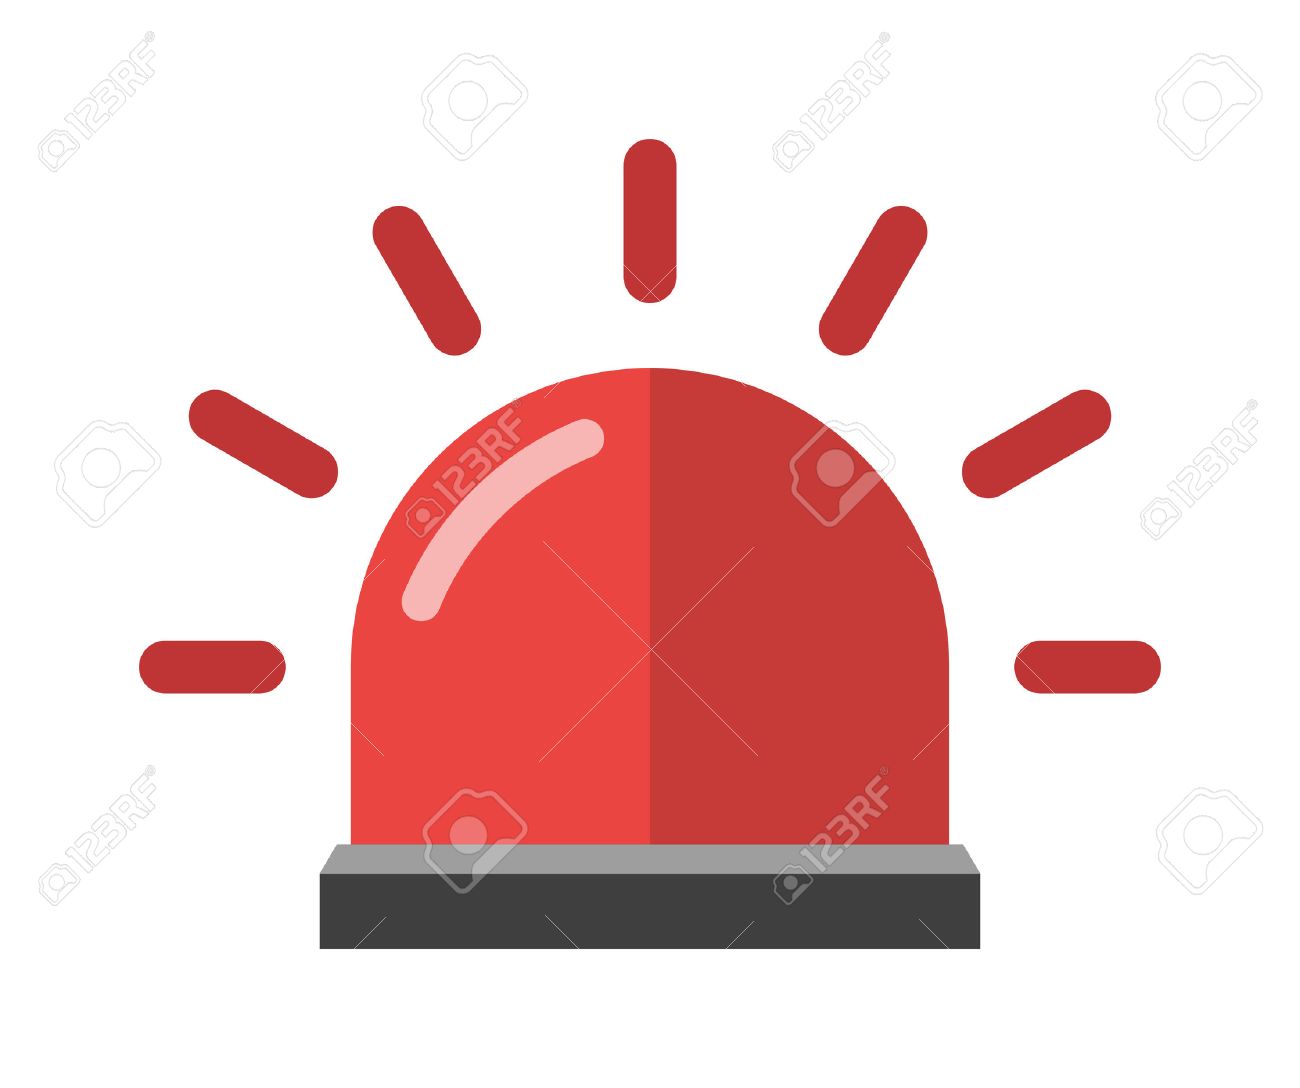 Urgent icon. Internet button on white background. stock images 